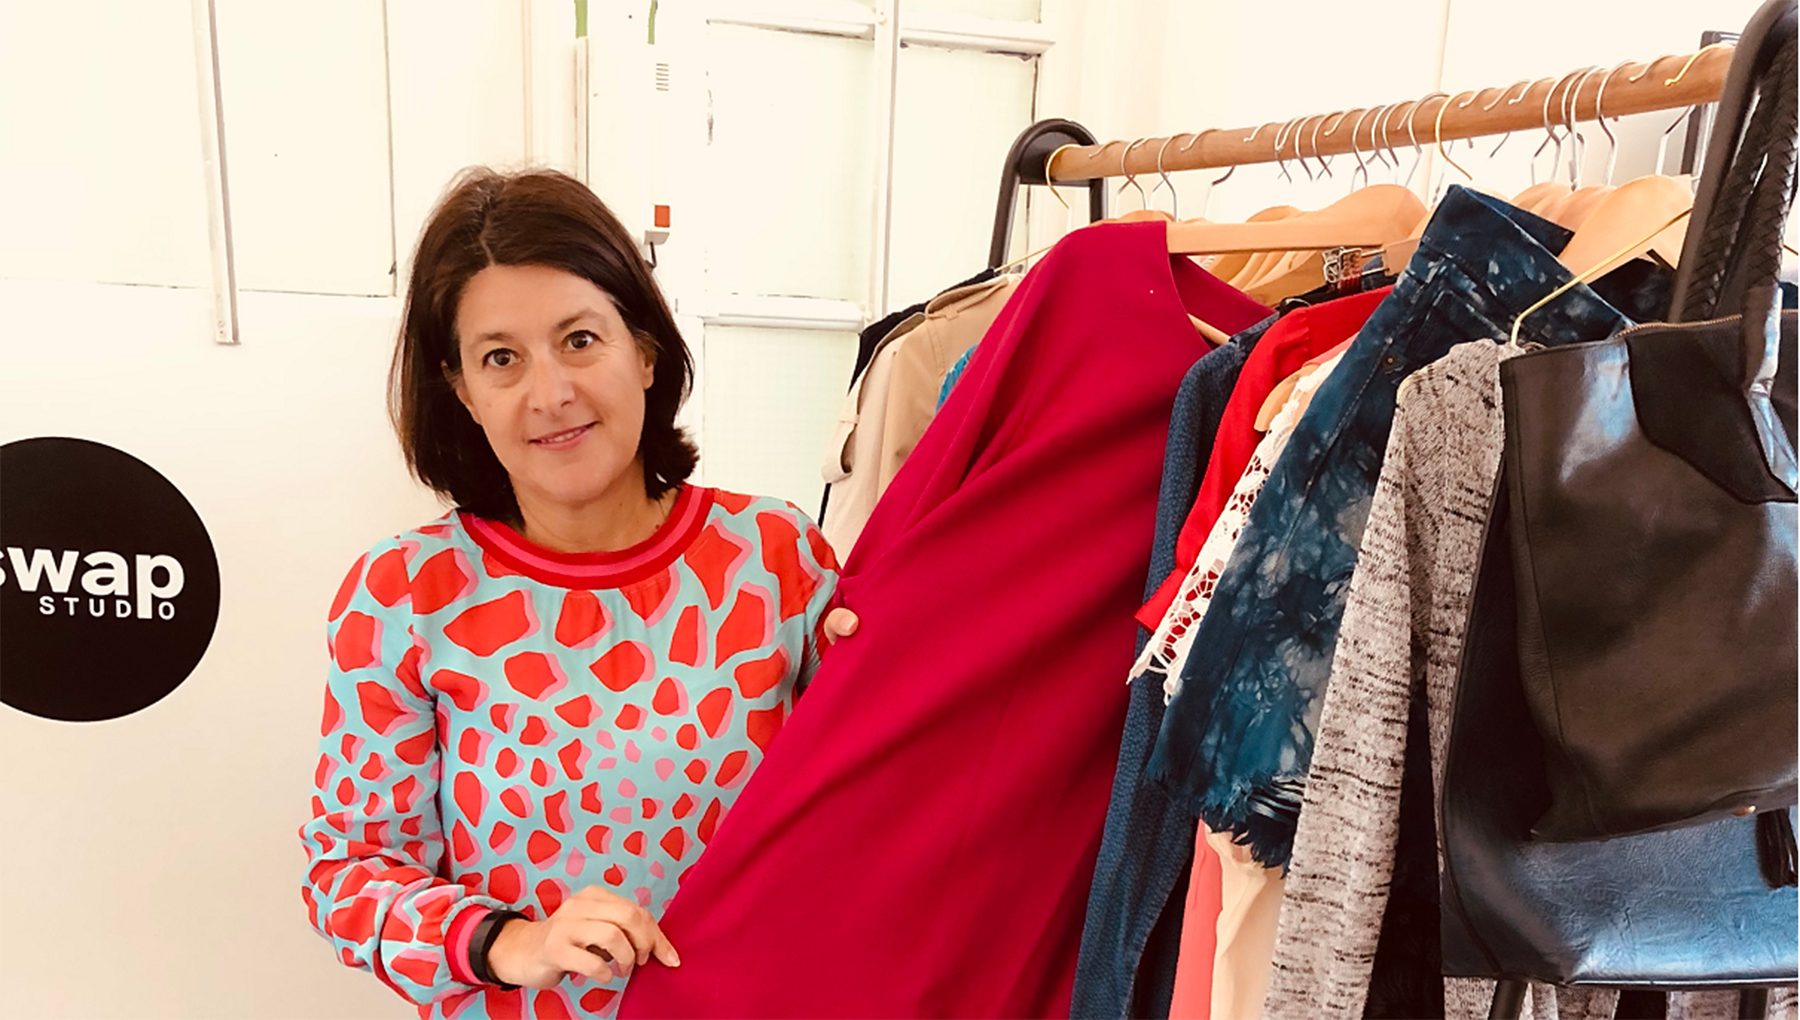 Kathryn Saducas, co-founder of Swap-Studio, shown in her office holding a dress on a clothing rail.